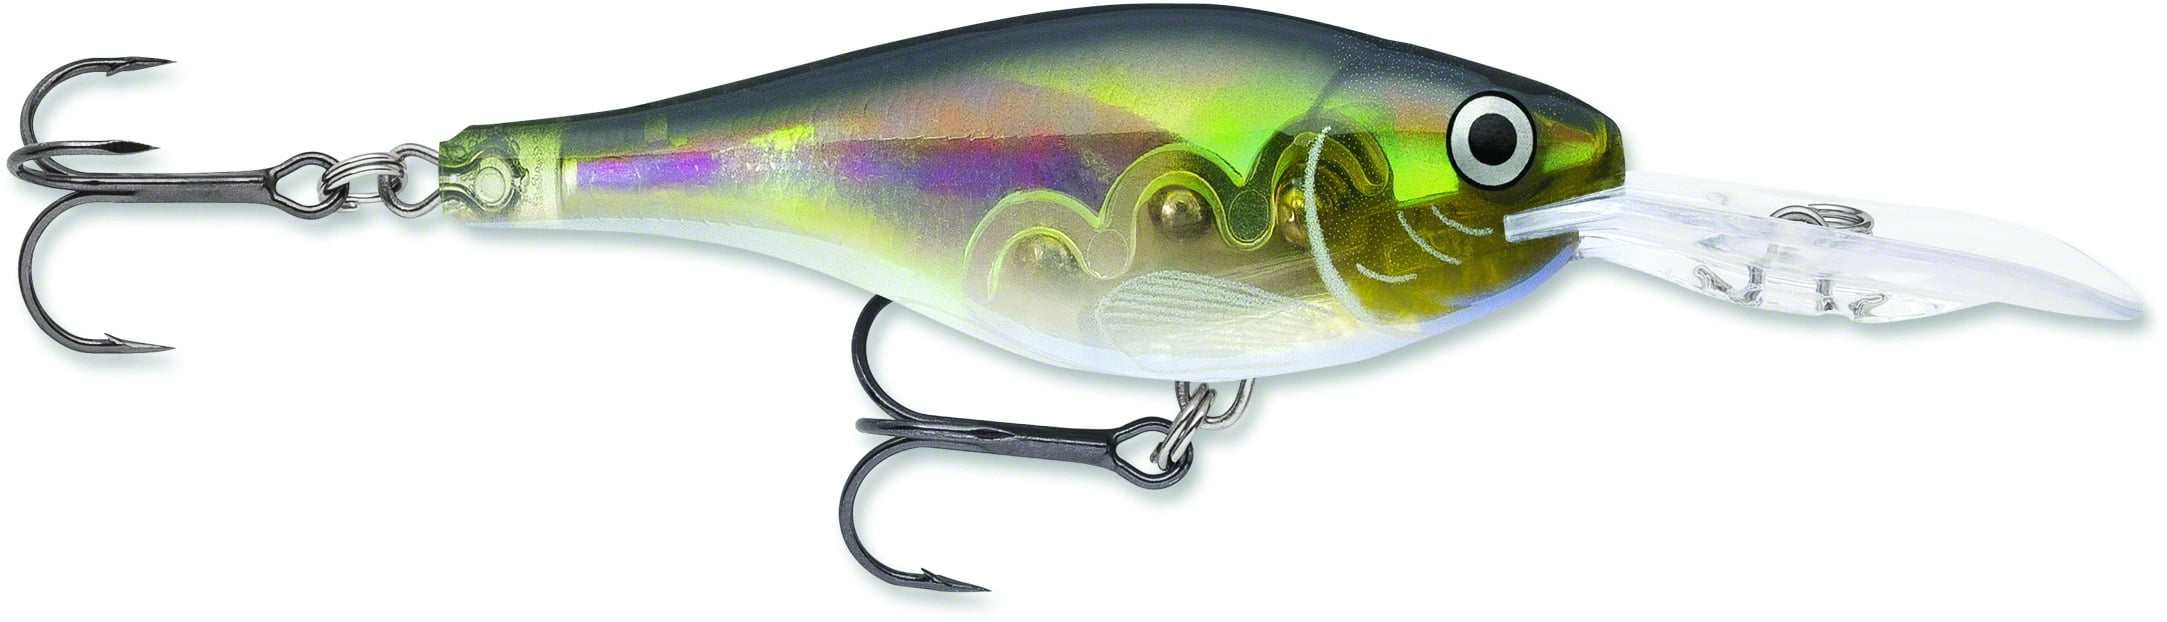 Details about   Jackall Soul Shad 58 SP SR Shallow Suspend Minnow Lure Muddy Chart 2742